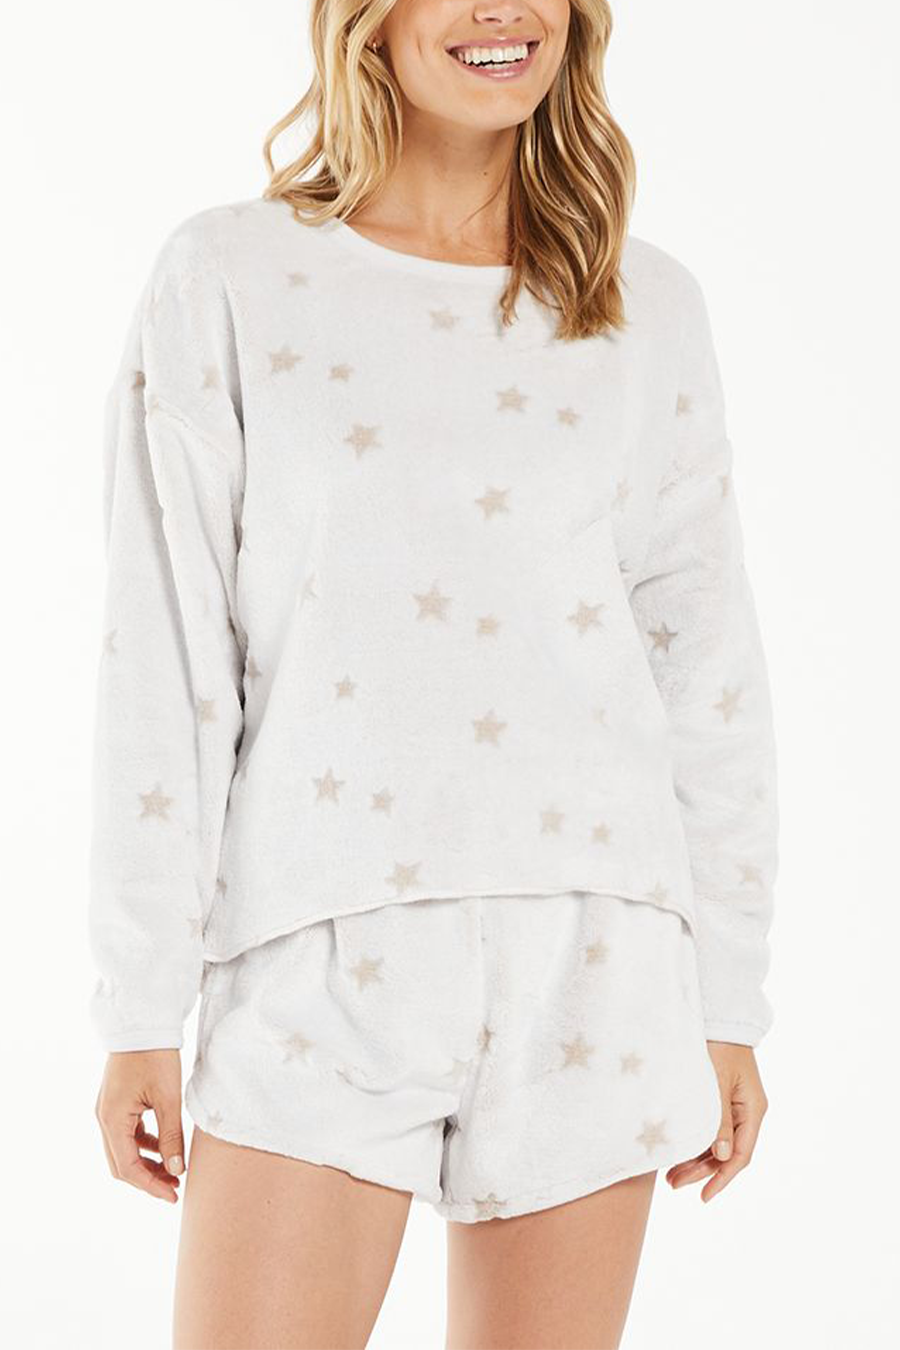 Frosted Plush Star Top | Latte - Main Image Number 1 of 1